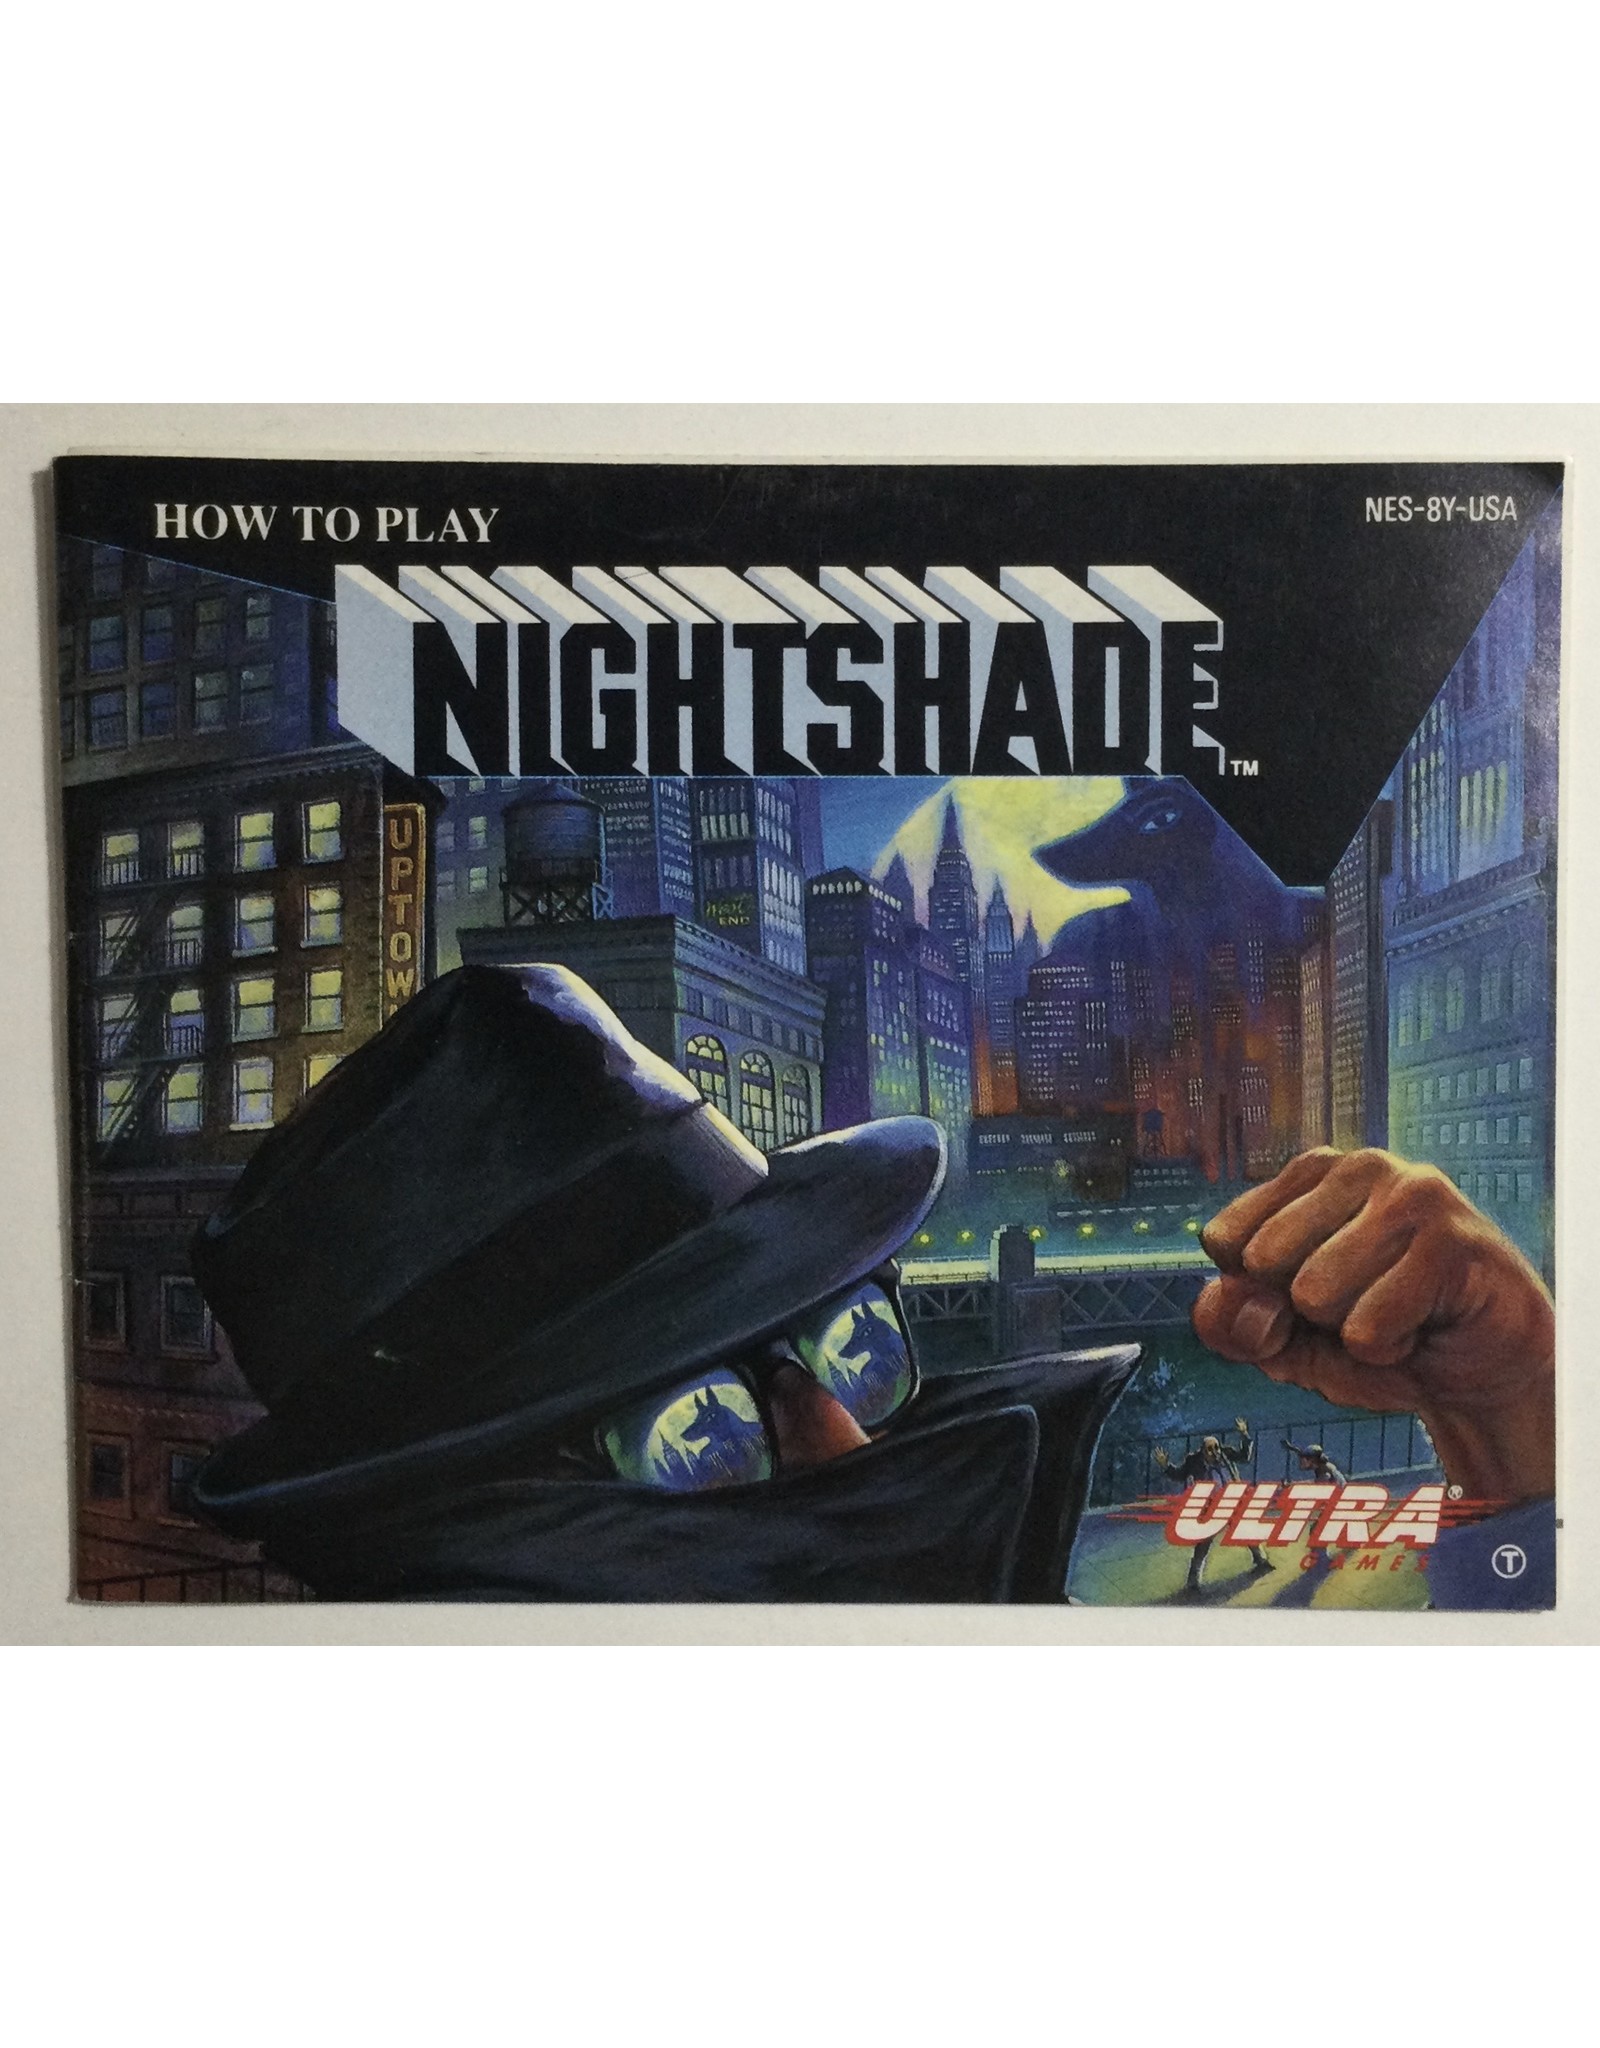 ULTRA Games Nightshade for Nintendo Entertainment system (NES)